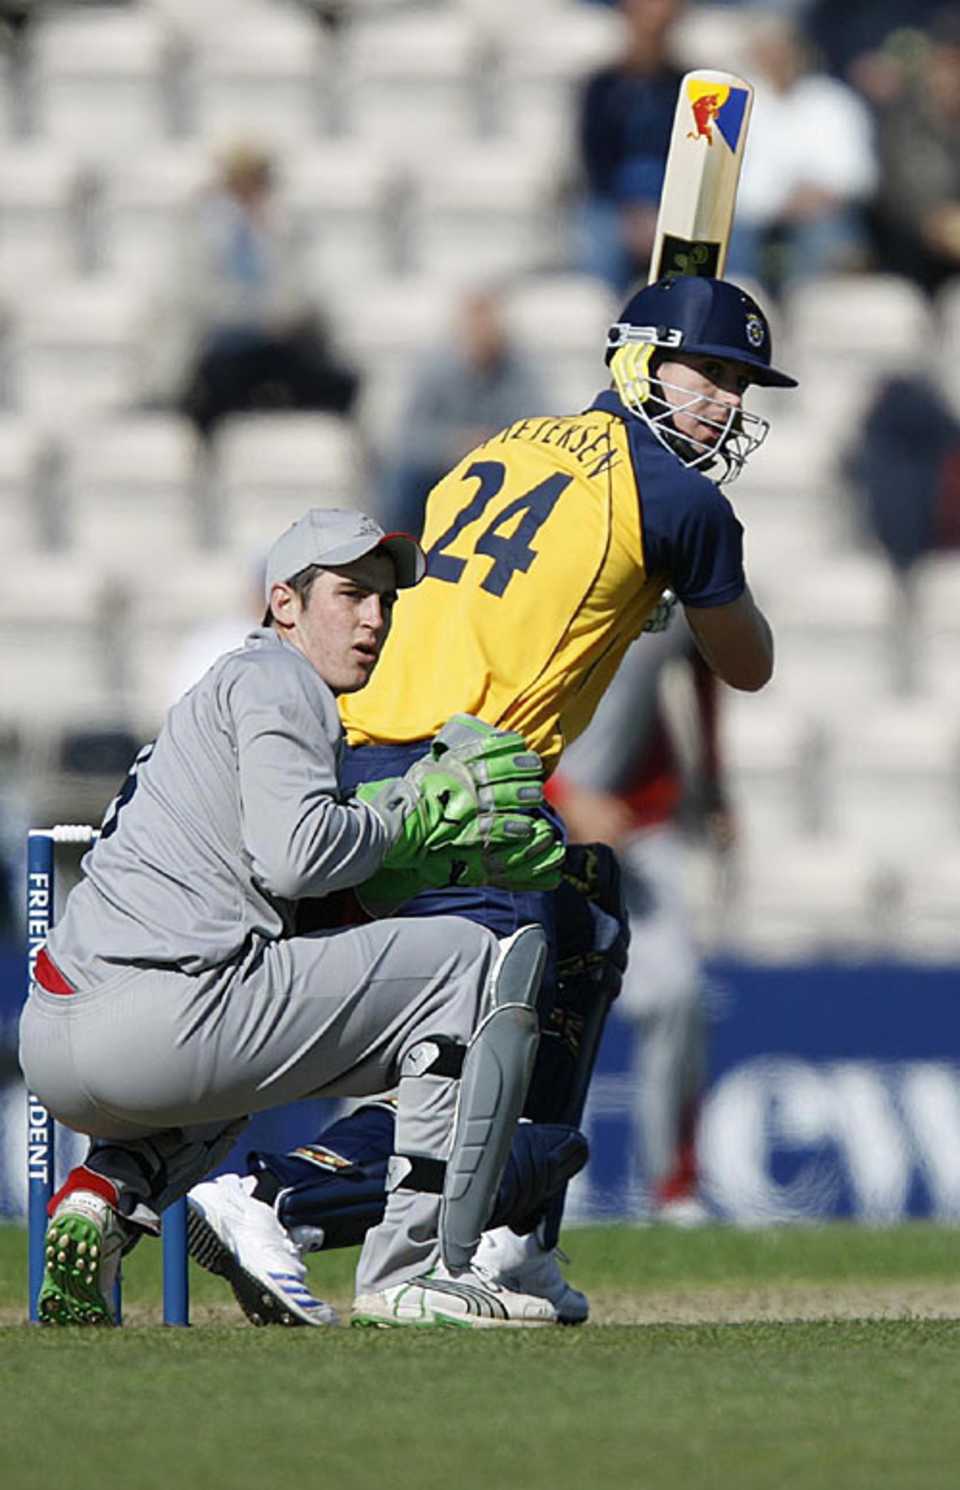 Kevin Pietersen on his way to a one-day fifty, Hampshire v Somerset, Friends Provident Trophy, Southampton, May 2, 2008